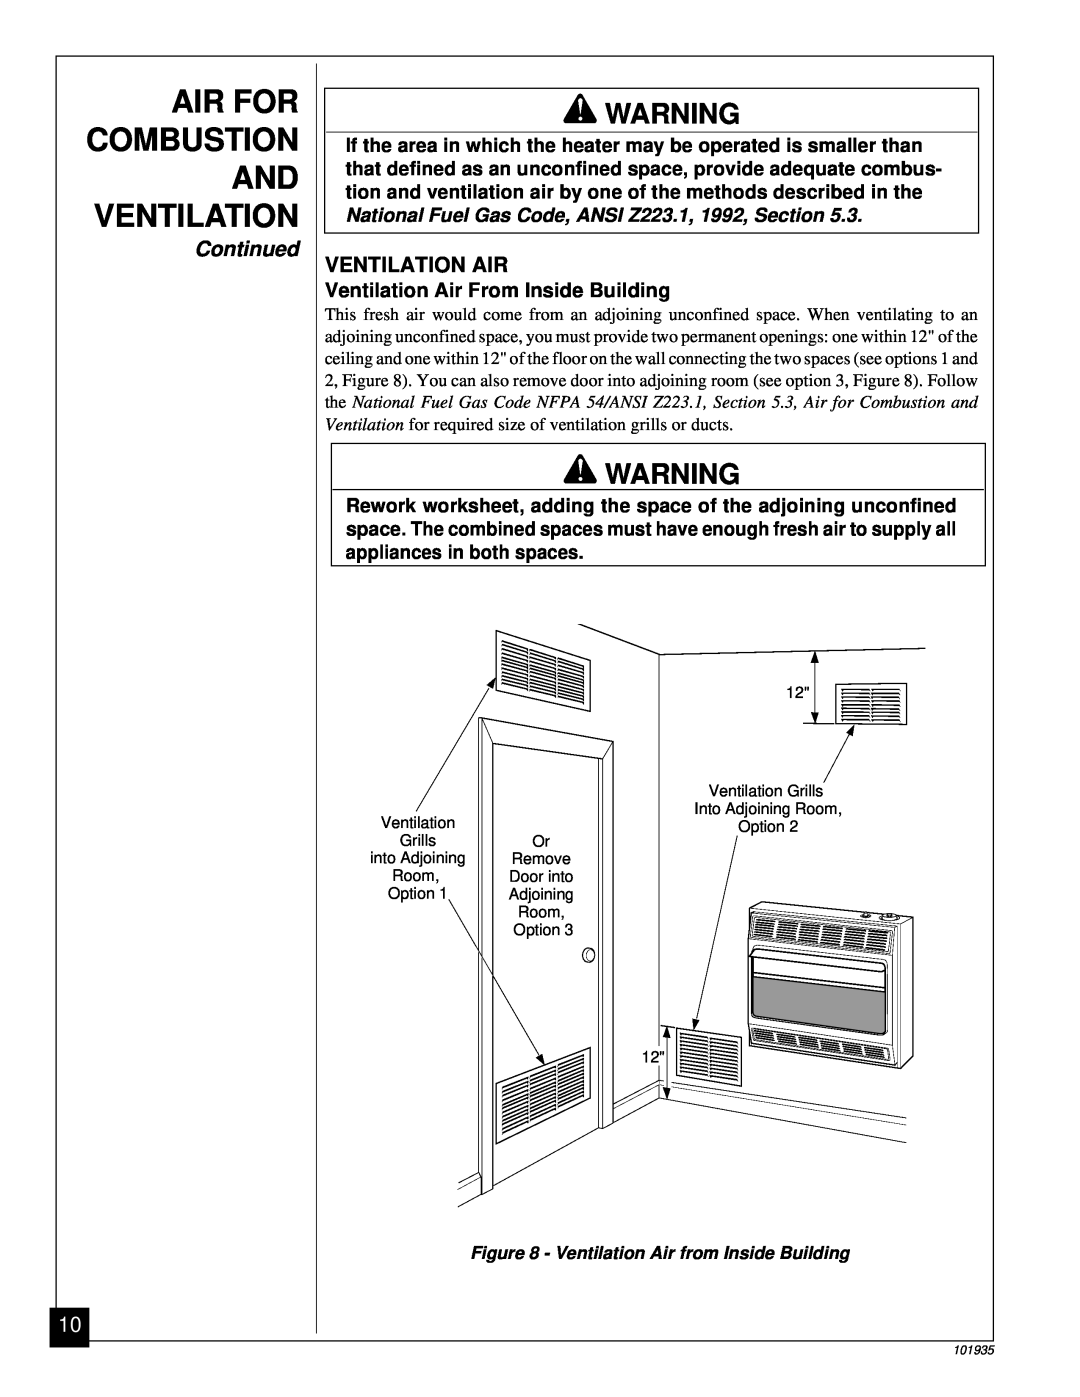 Desa RFP28TB Ventilation Air, If the area in which the heater may be operated is smaller than, appliances in both spaces 